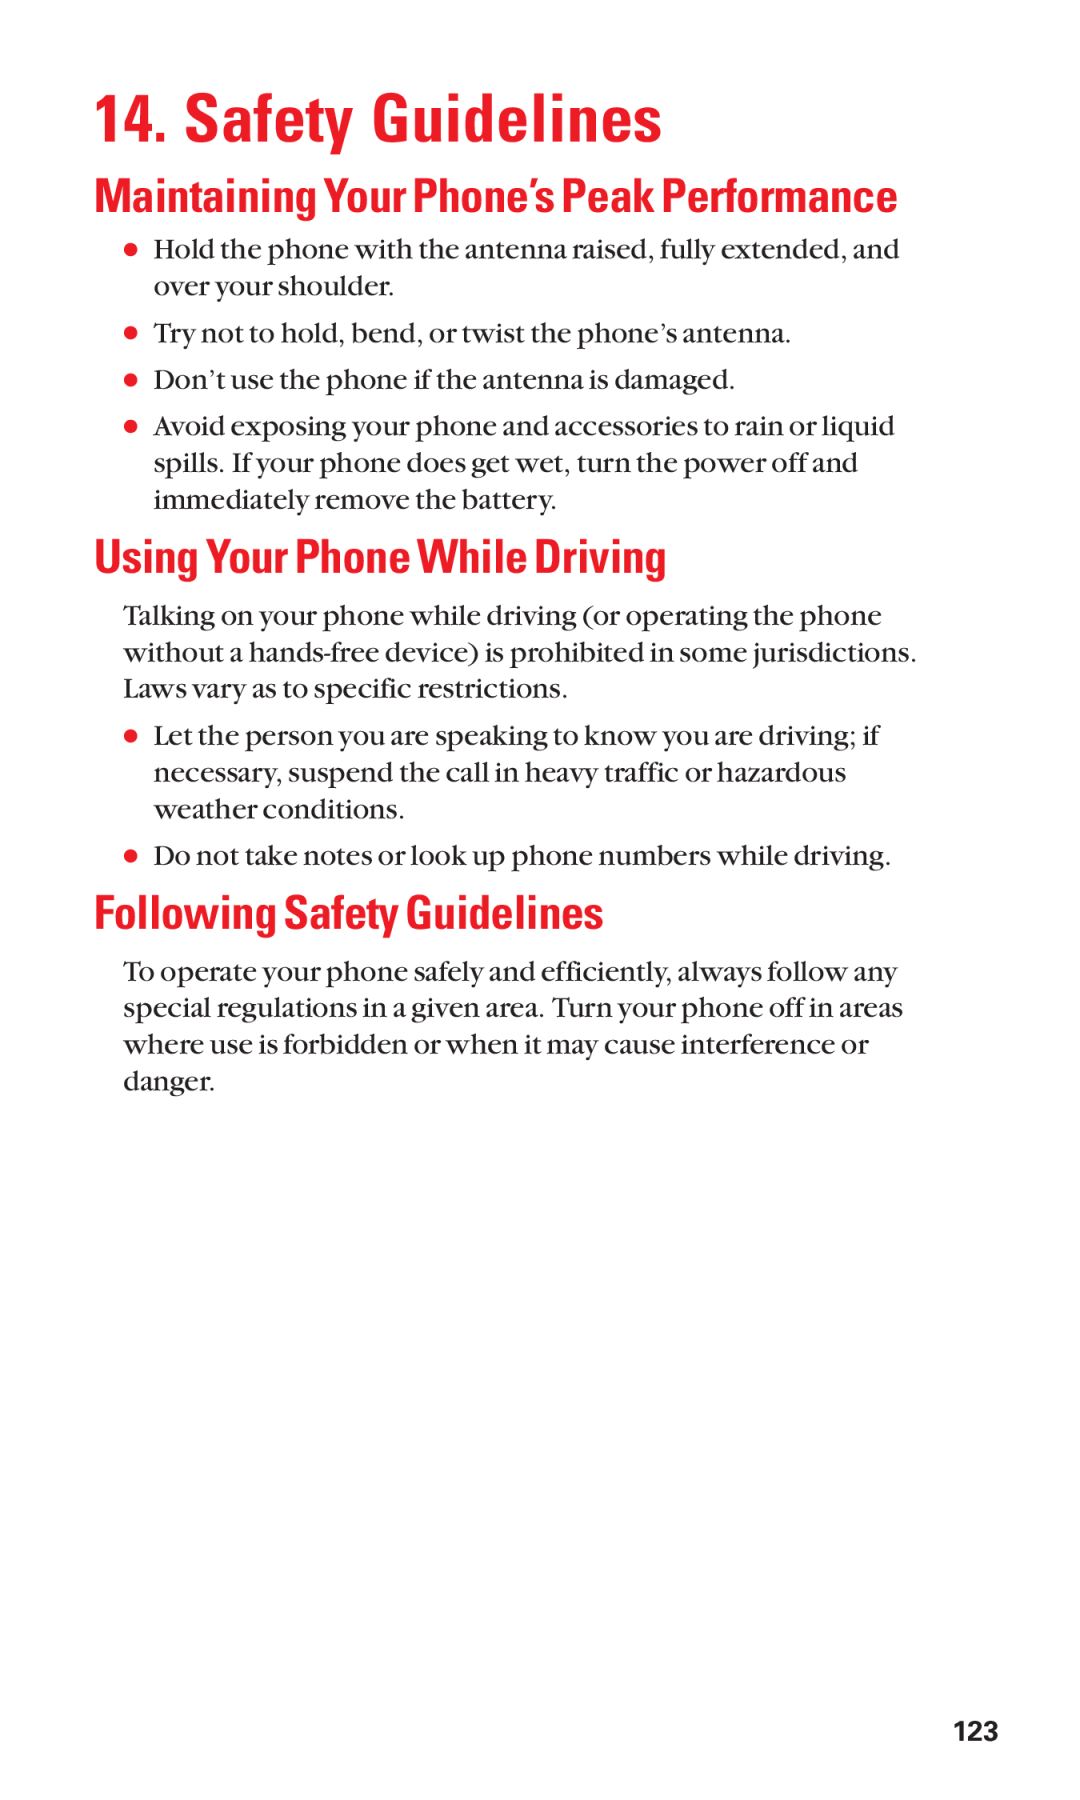 Sanyo SCP-7050 Using Your Phone While Driving, Following Safety Guidelines, Maintaining Your Phone’s Peak Performance 